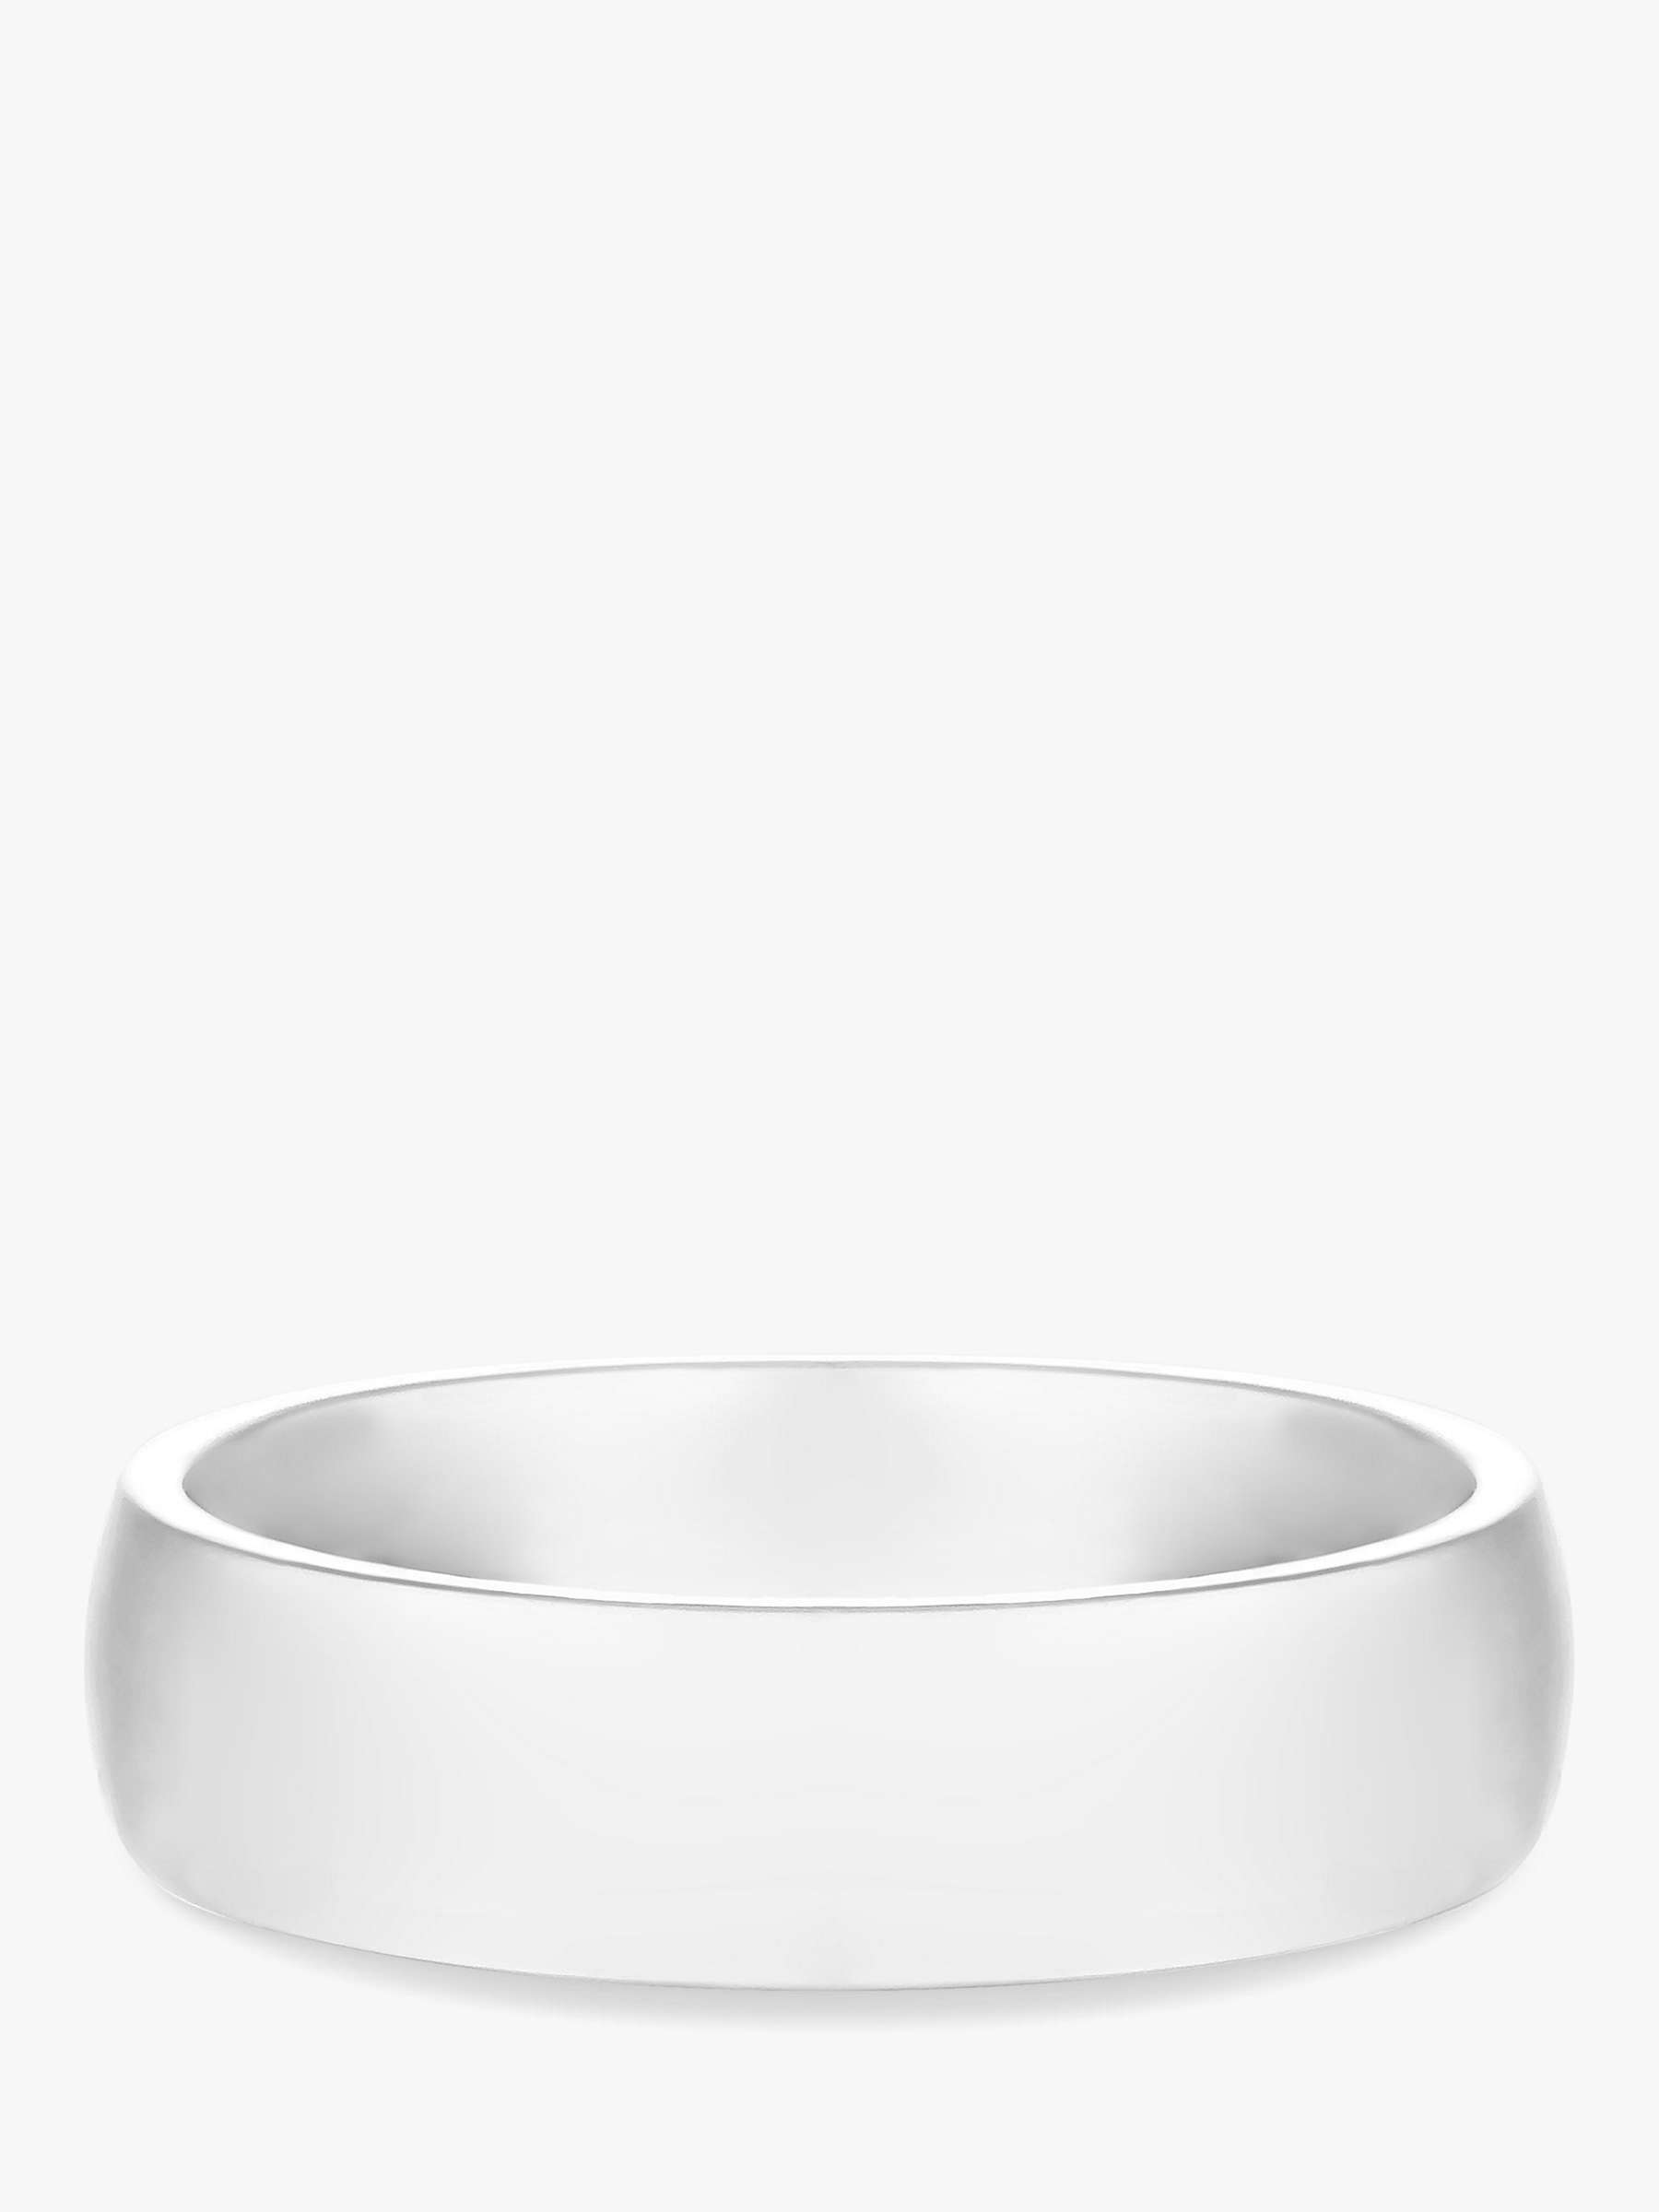 Buy Simply Silver Polished Sterling Silver Wedding Band, Silver Online at johnlewis.com